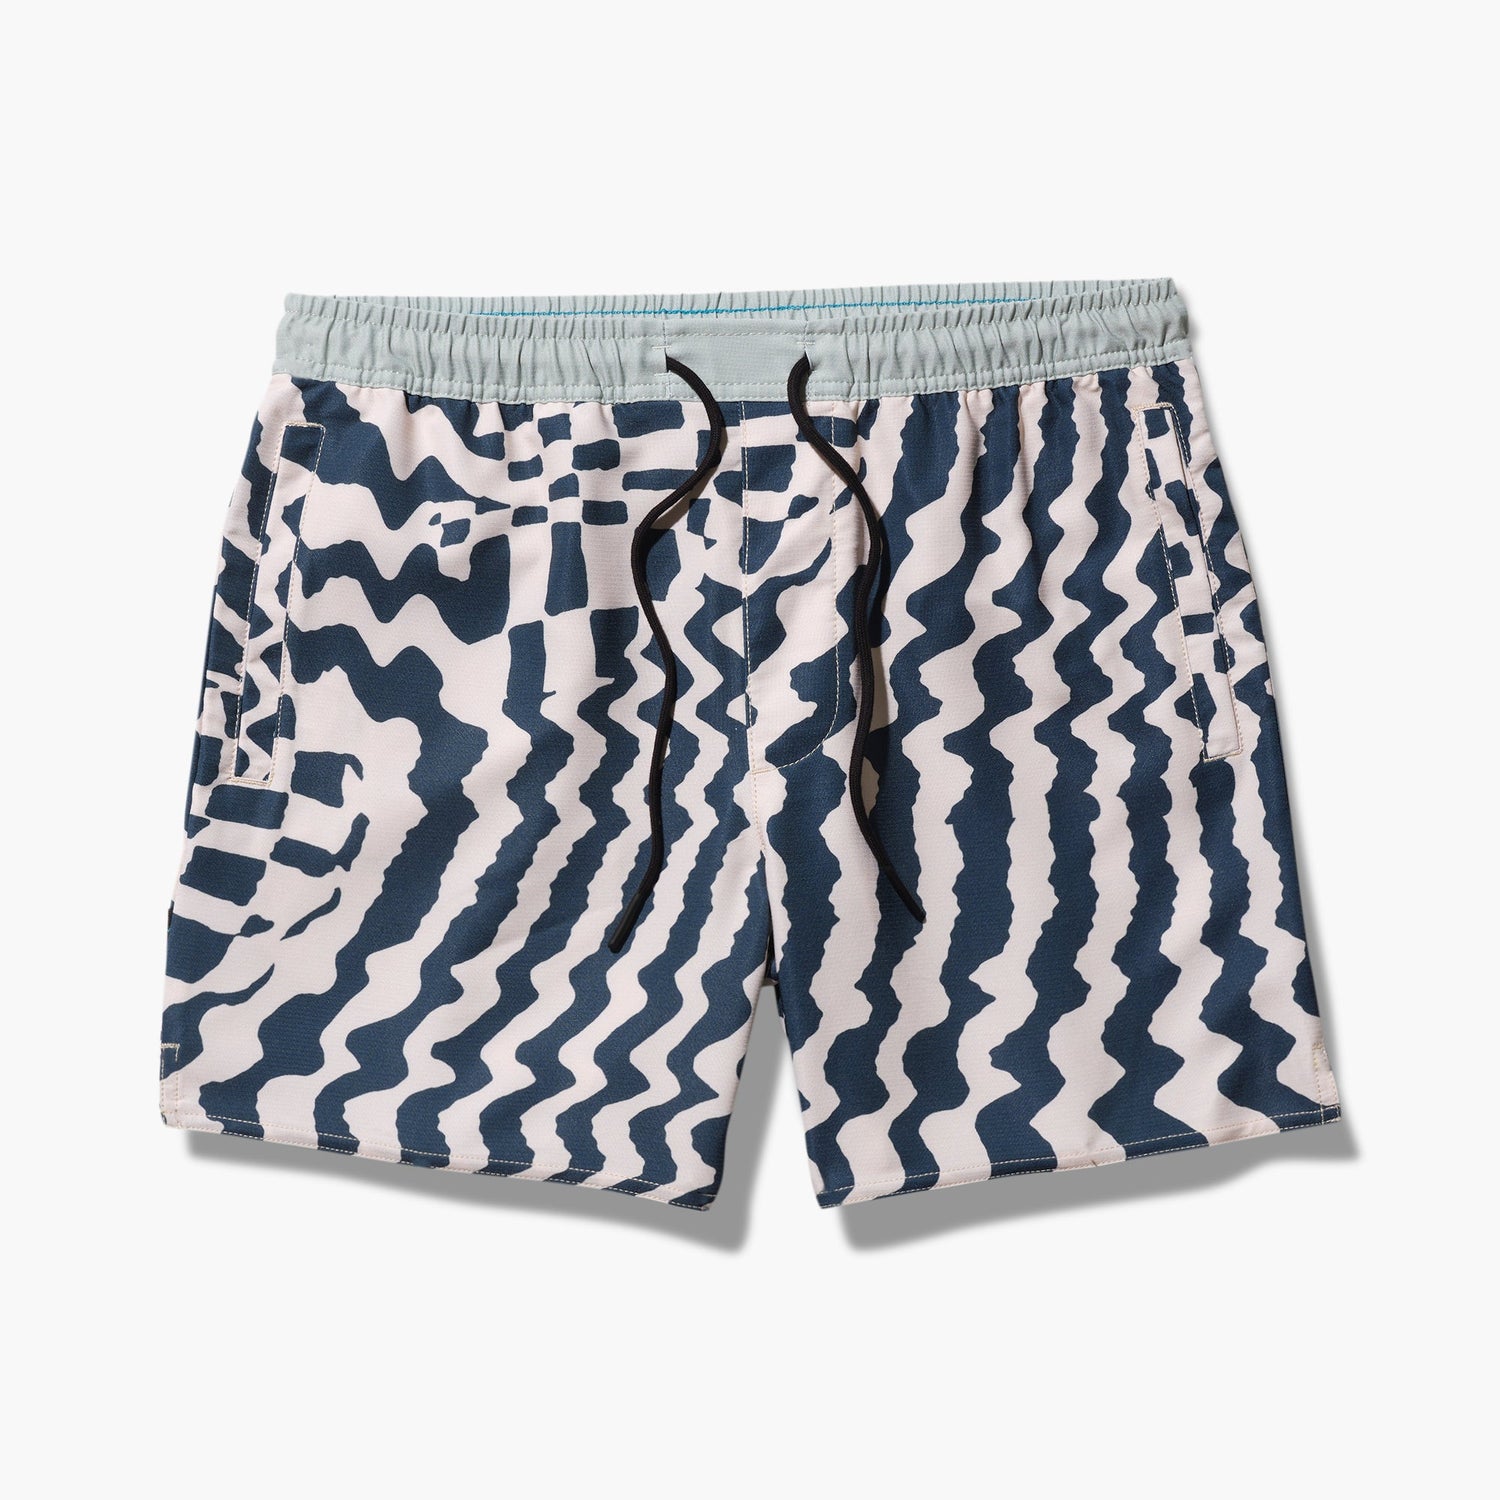 Stance Complex Athletic Short 5" Checker